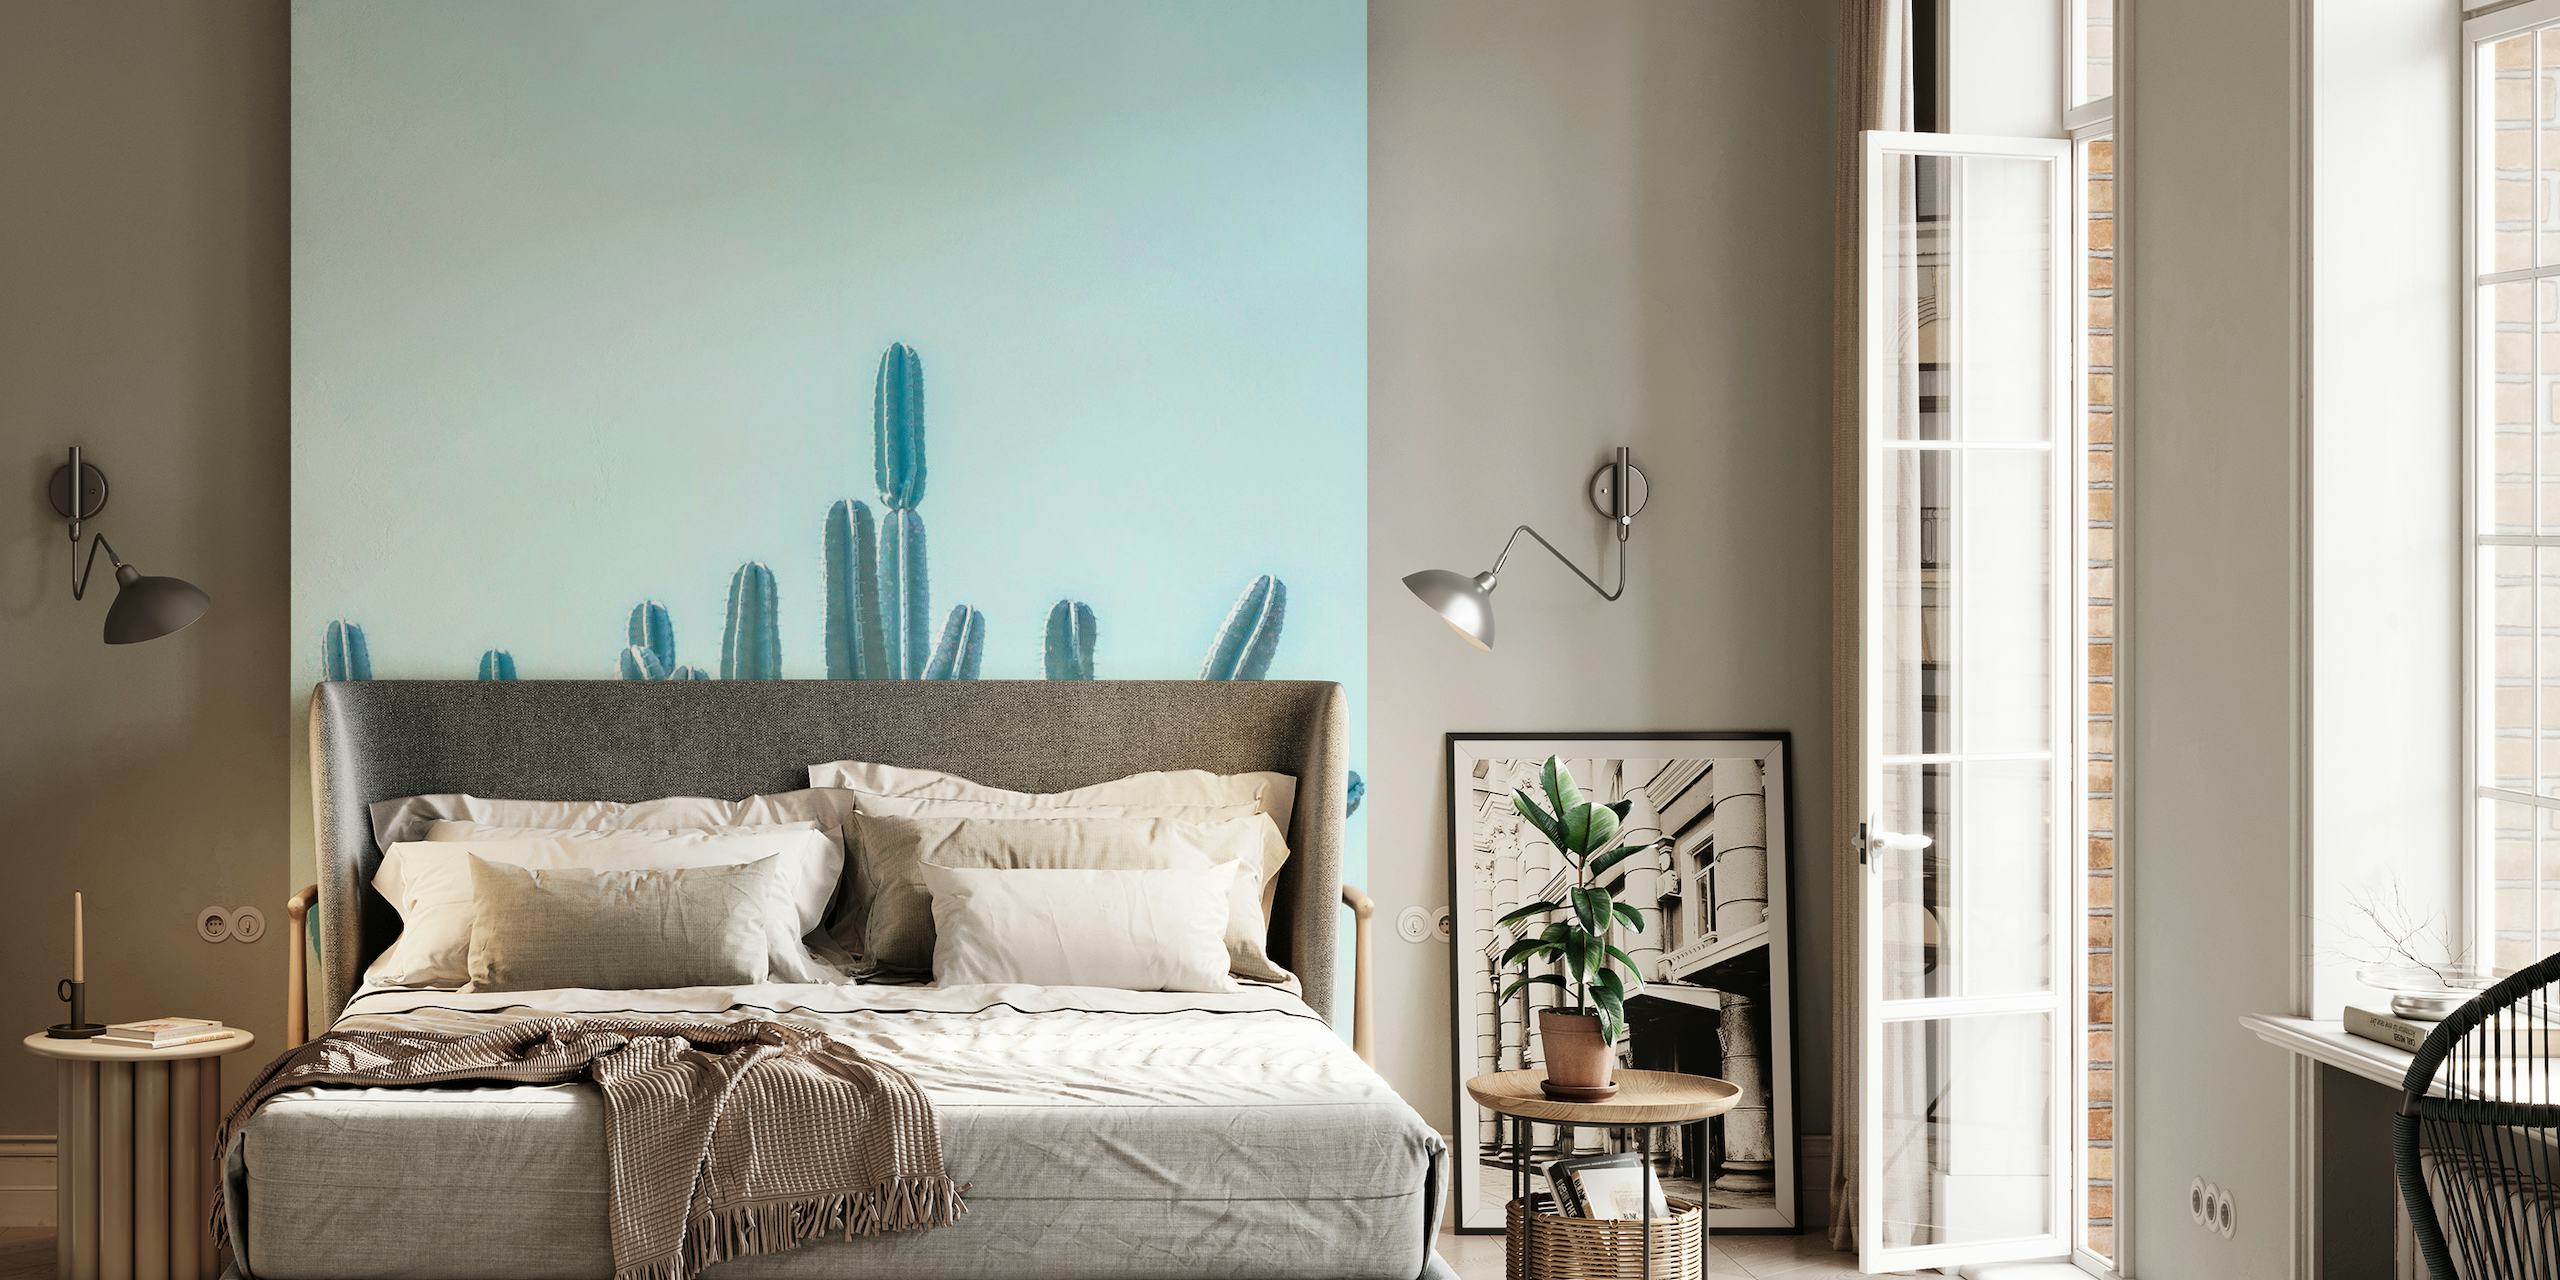 Minimalist cactus wall mural with clear blue sky background